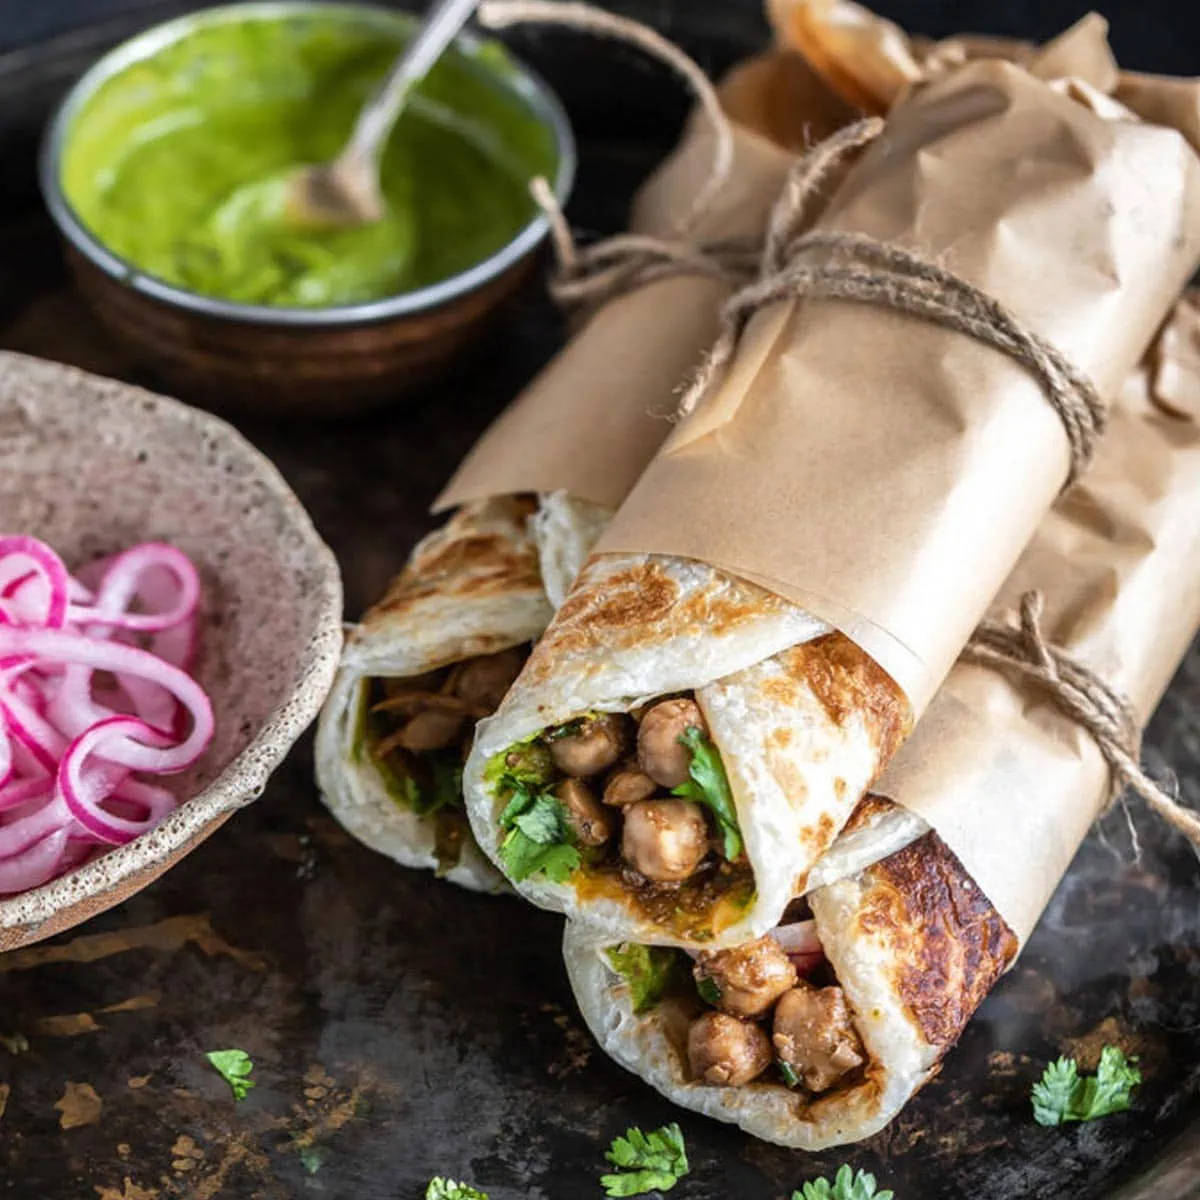 three wraps rolled in parchment paper and tied with thread stacked together with a bowl of chutney and pickled onions on the side